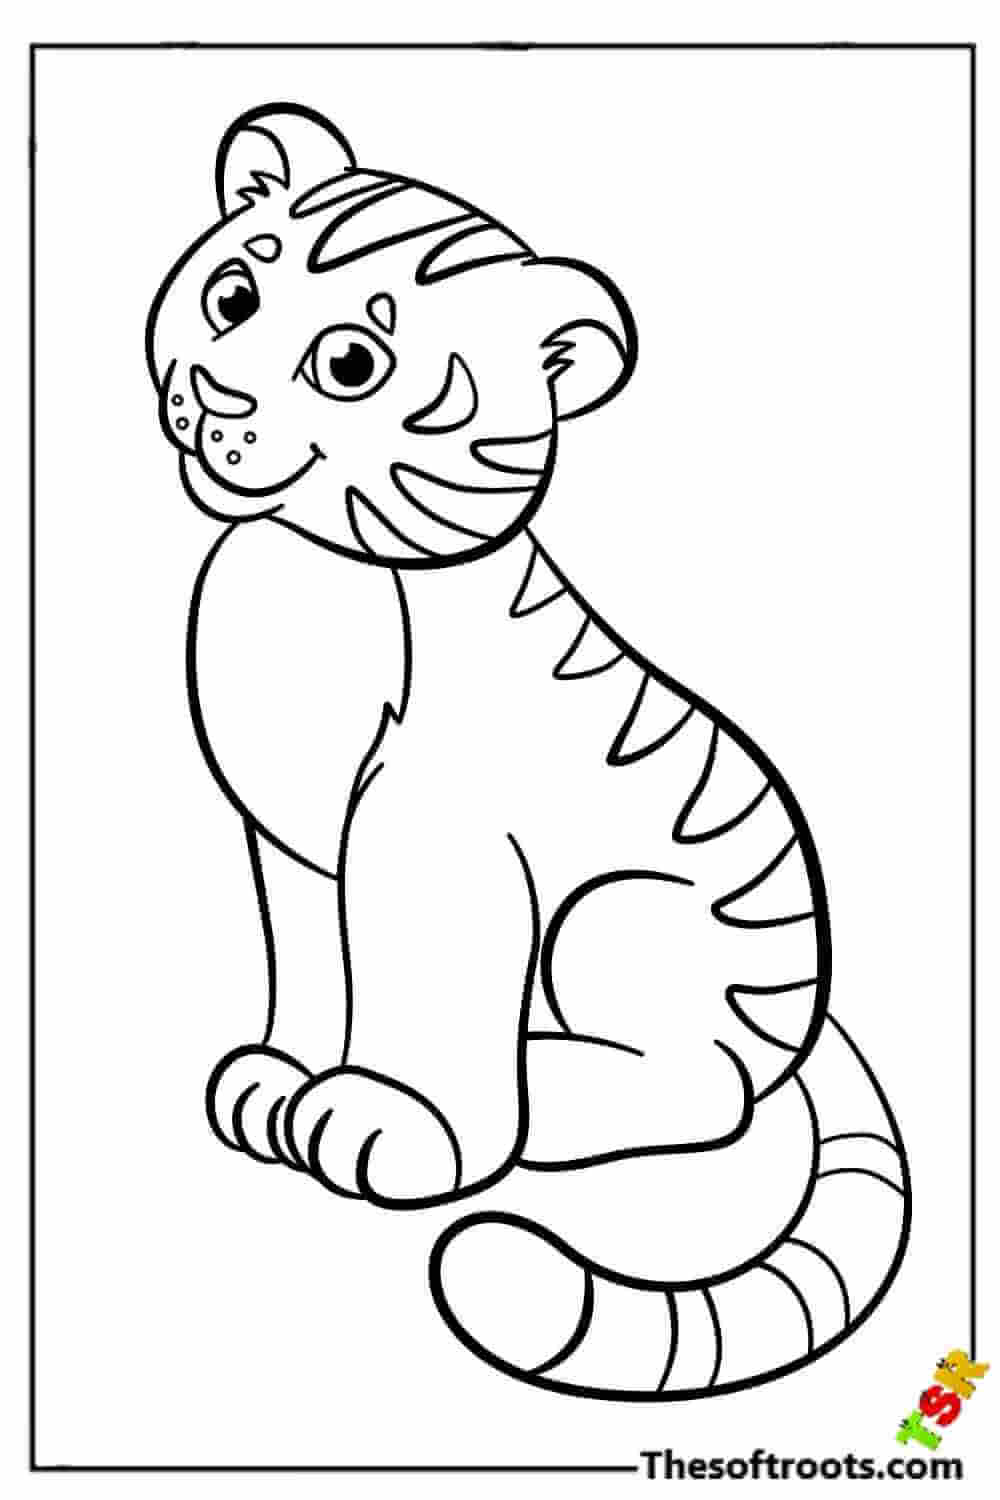 Cute Tiger coloring pages